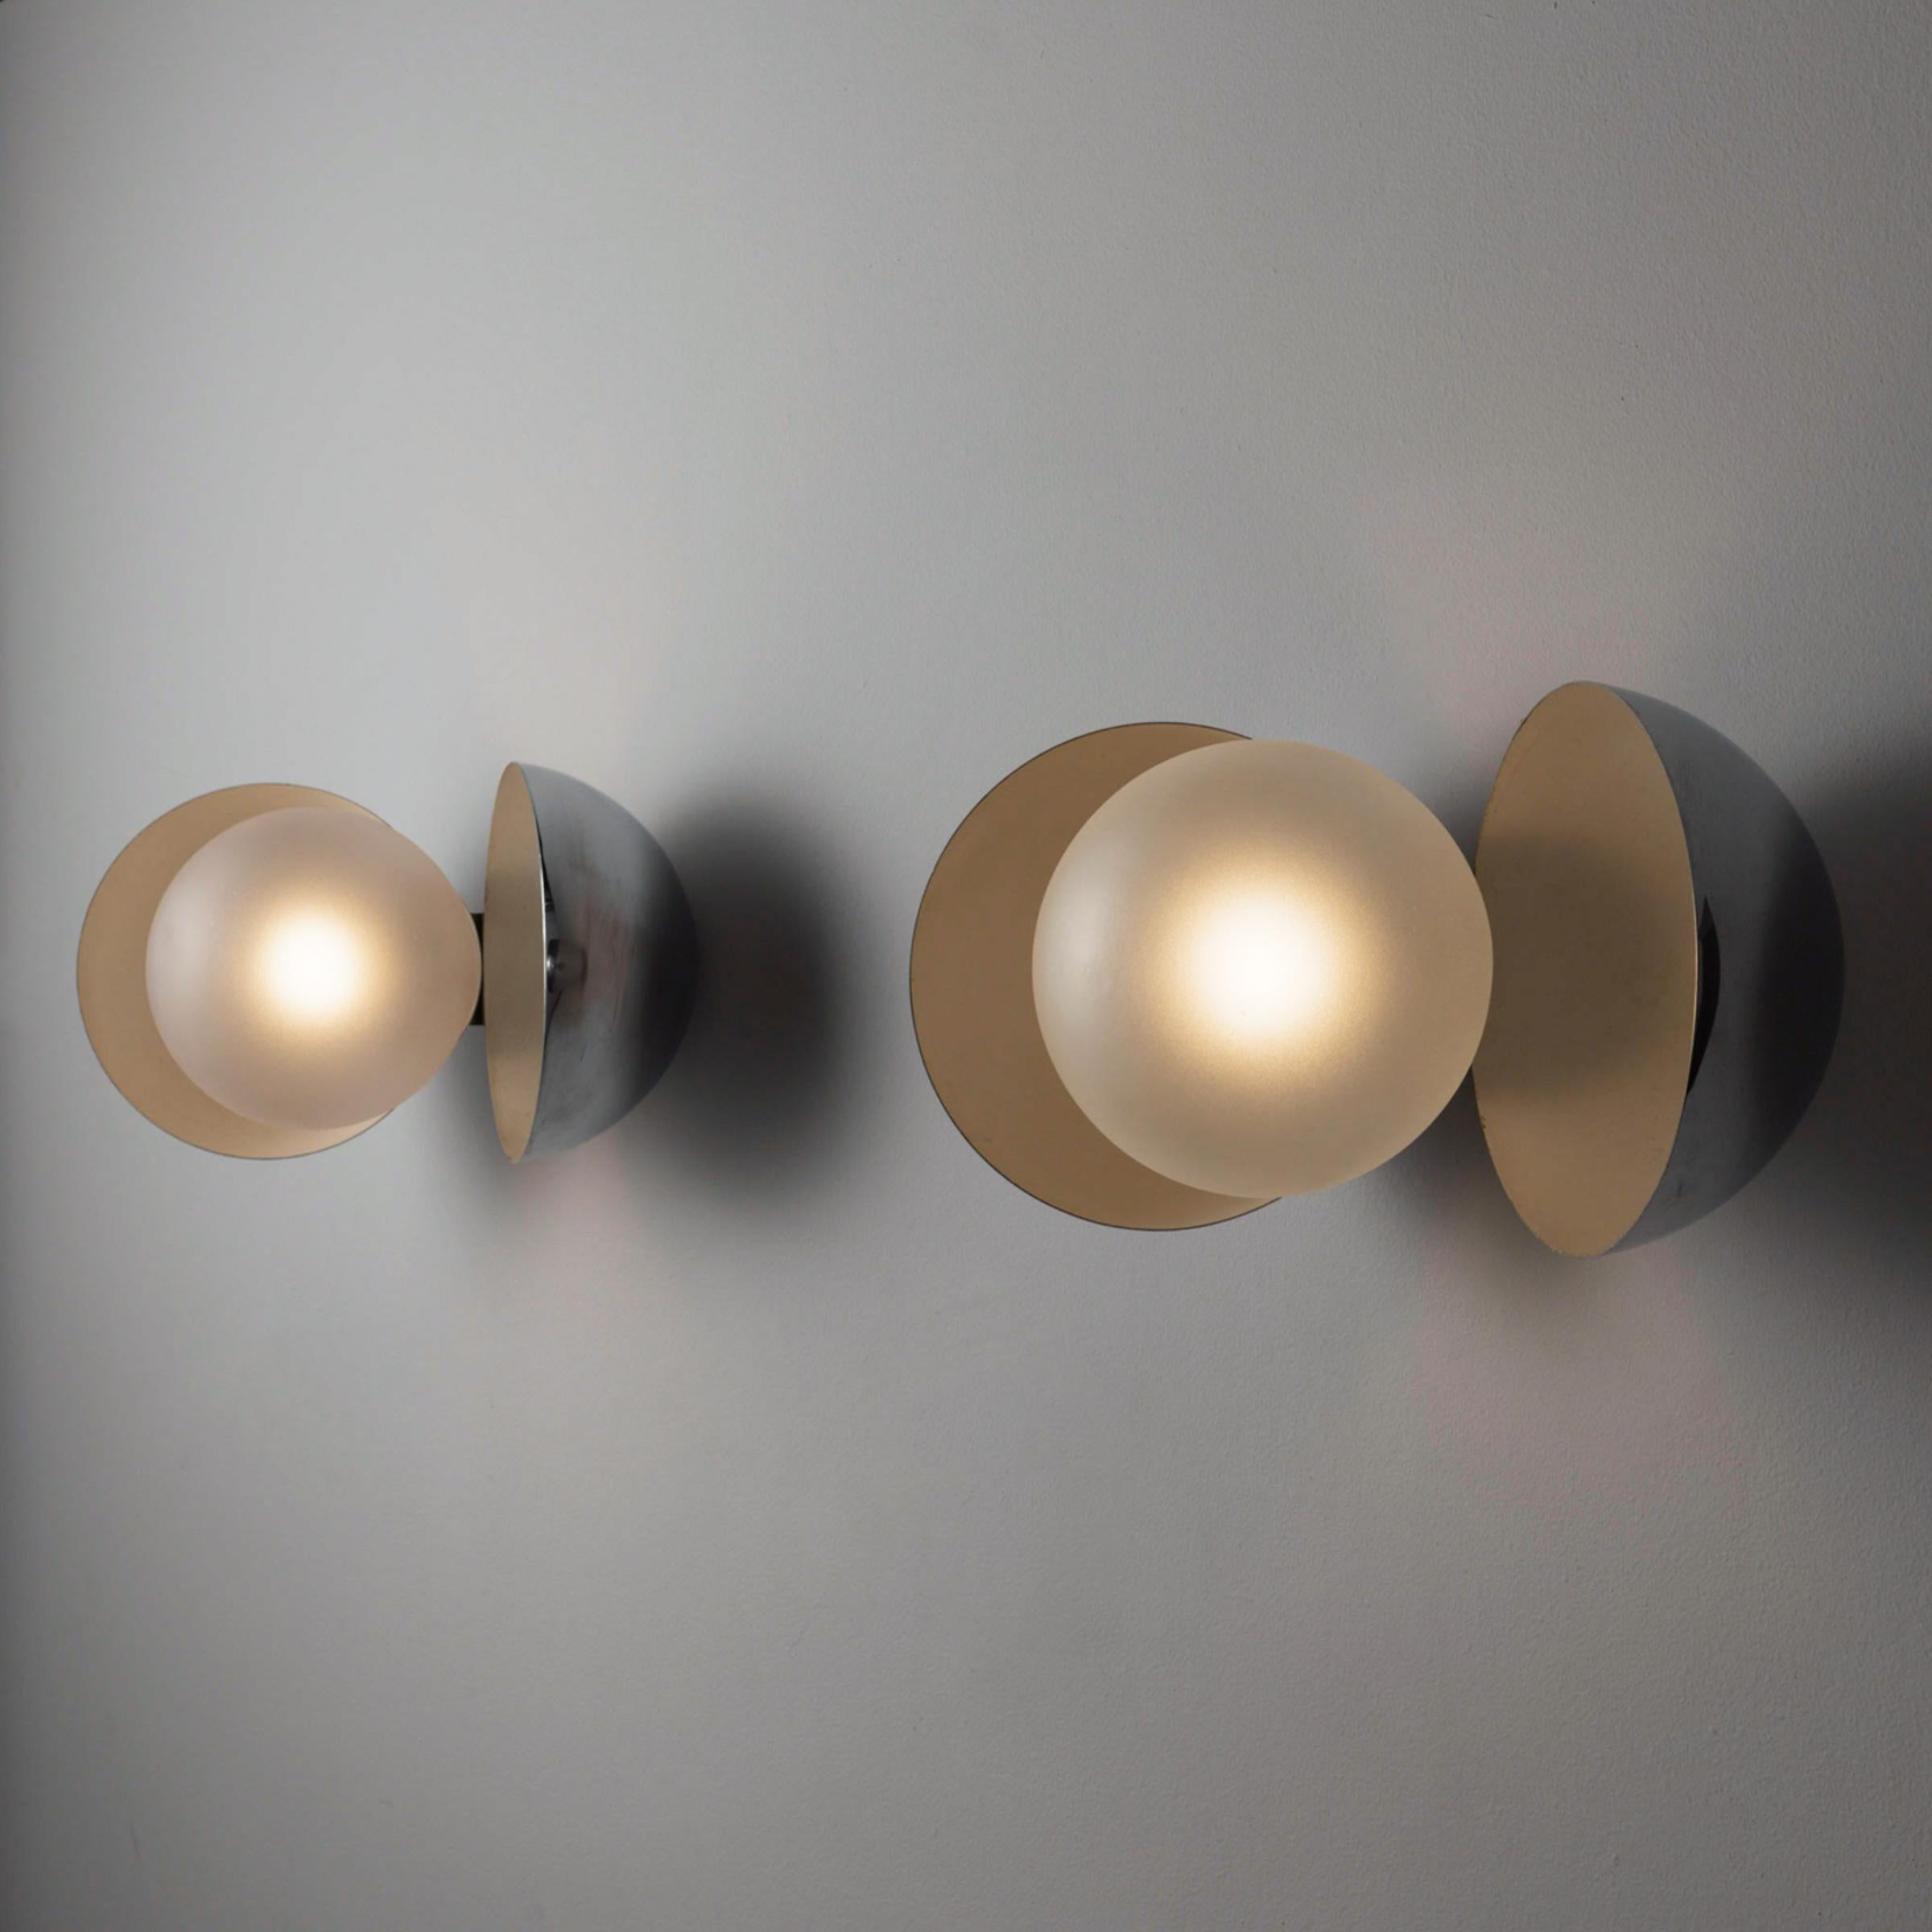 Frosted Rare Pair of Diaframma Sconces by G. Piero & a. Monti for Fontana Arte